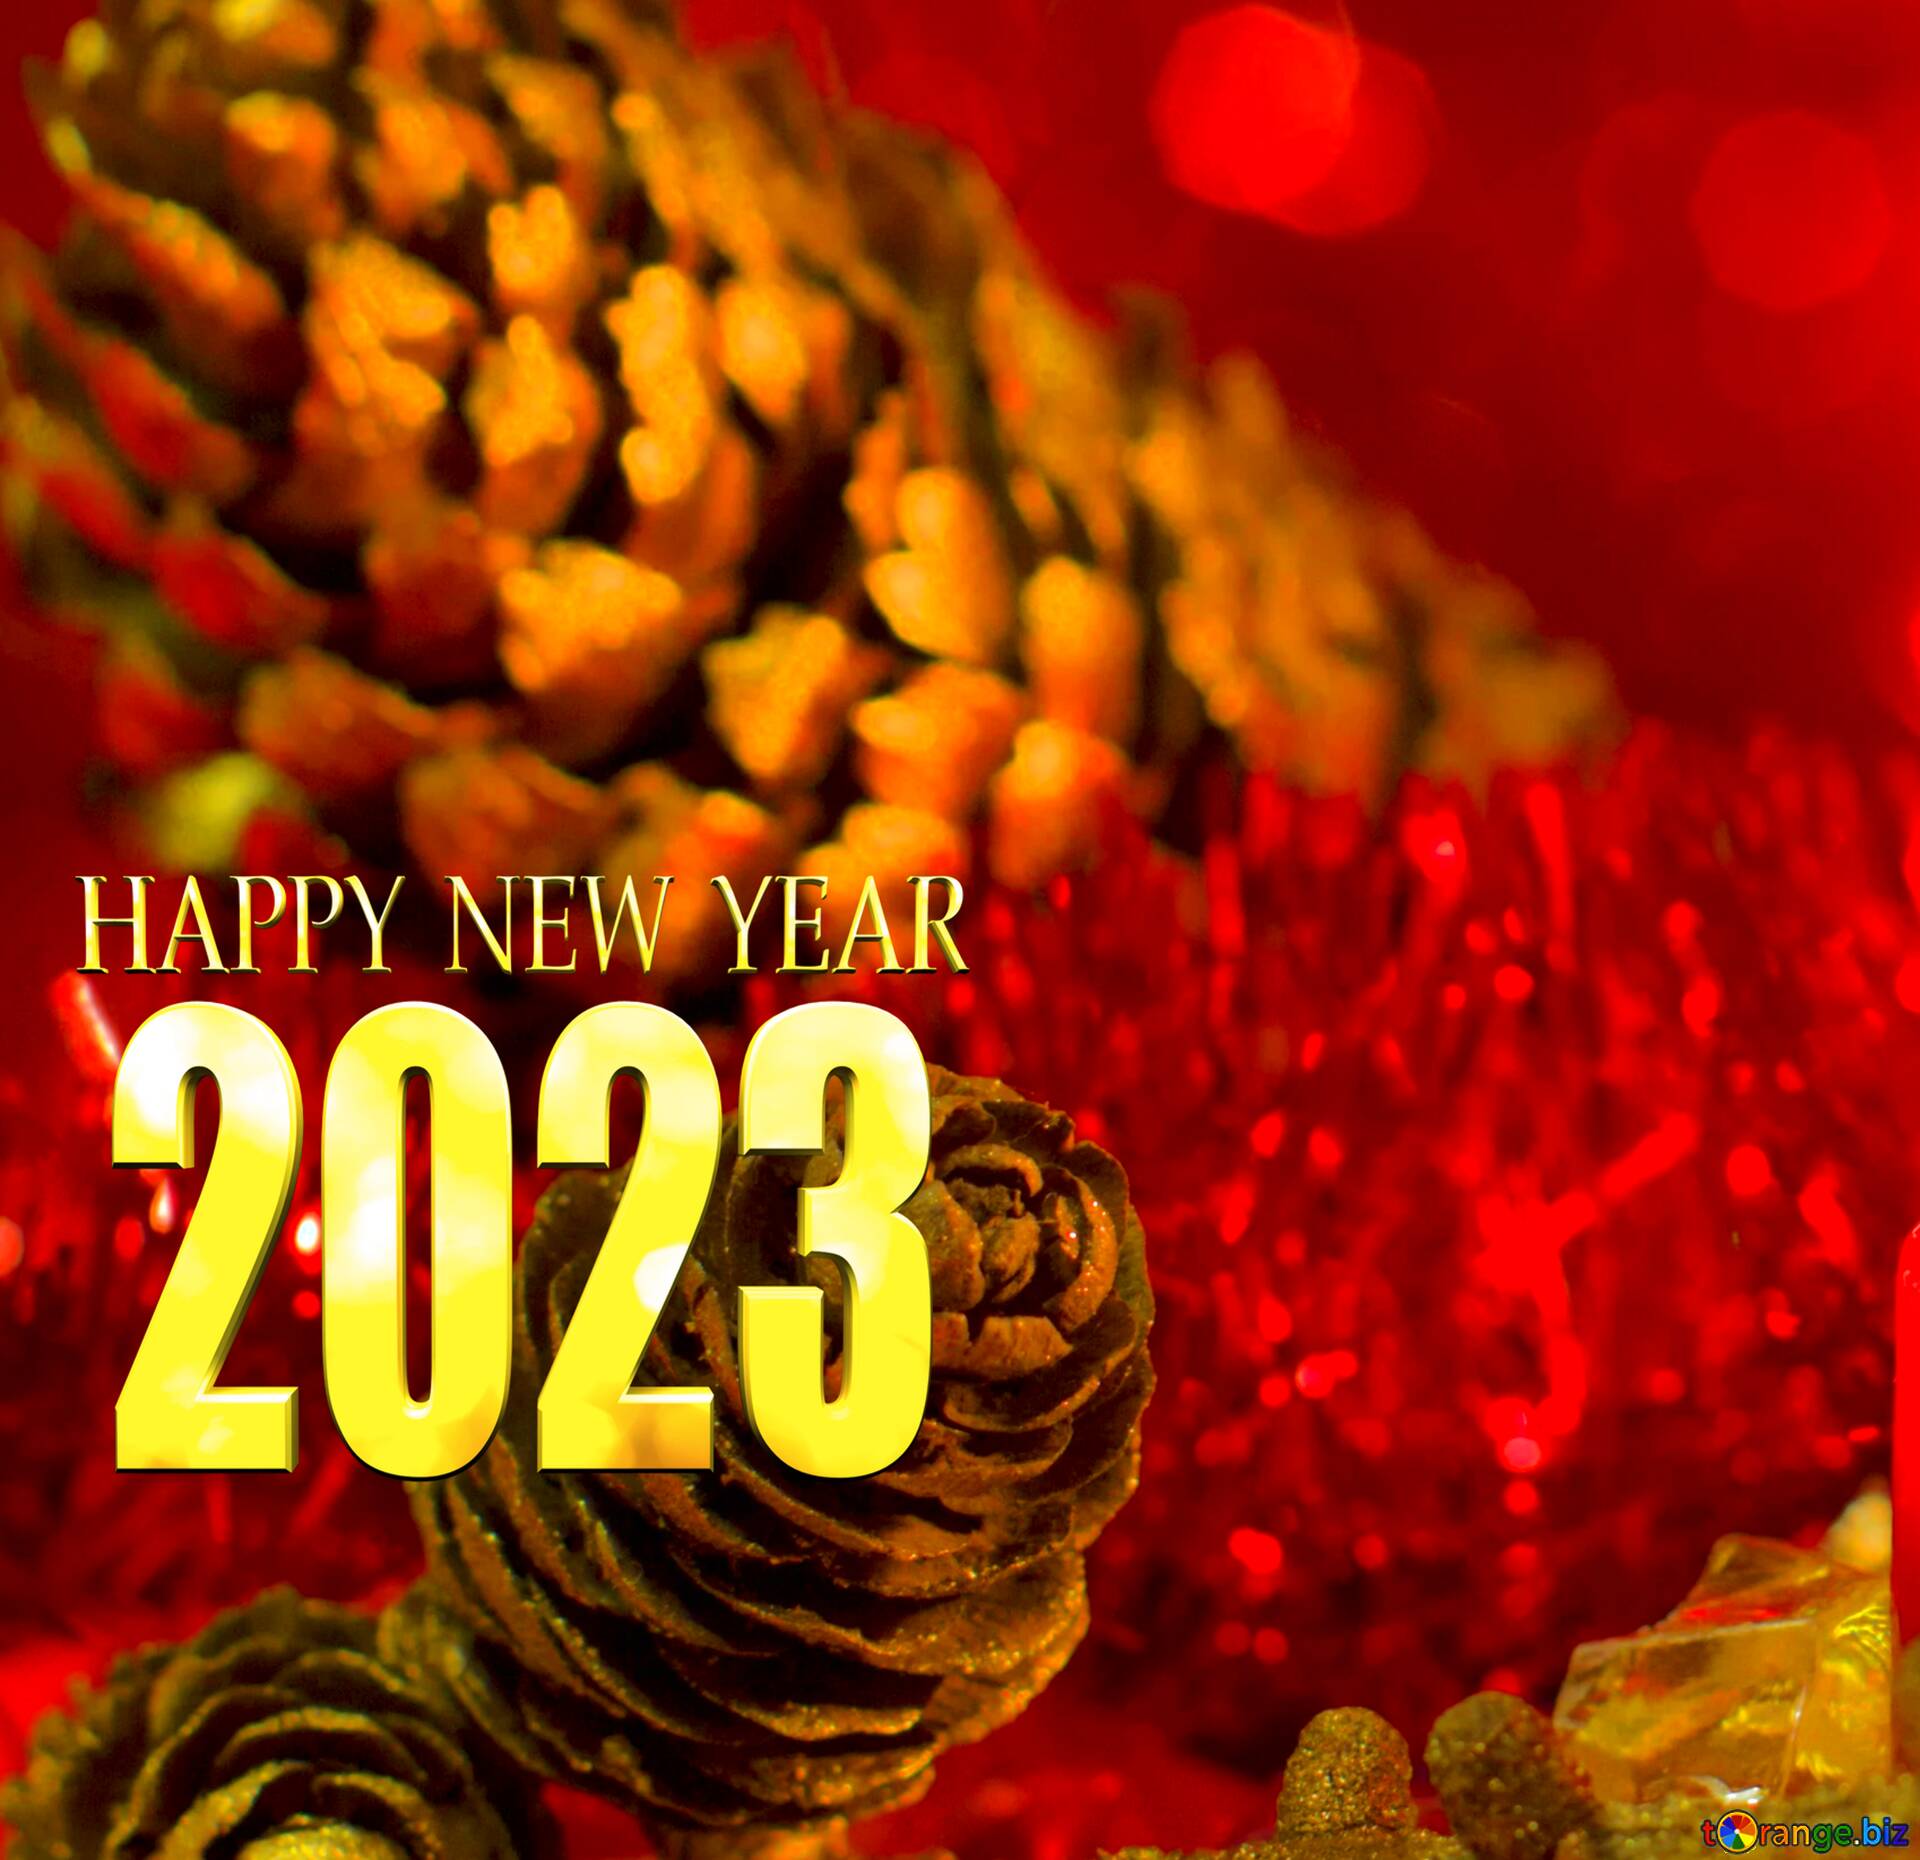 Download Free Picture Happy New Year 2023 On CC BY License Free Image Stock TOrange.biz Fx №23381